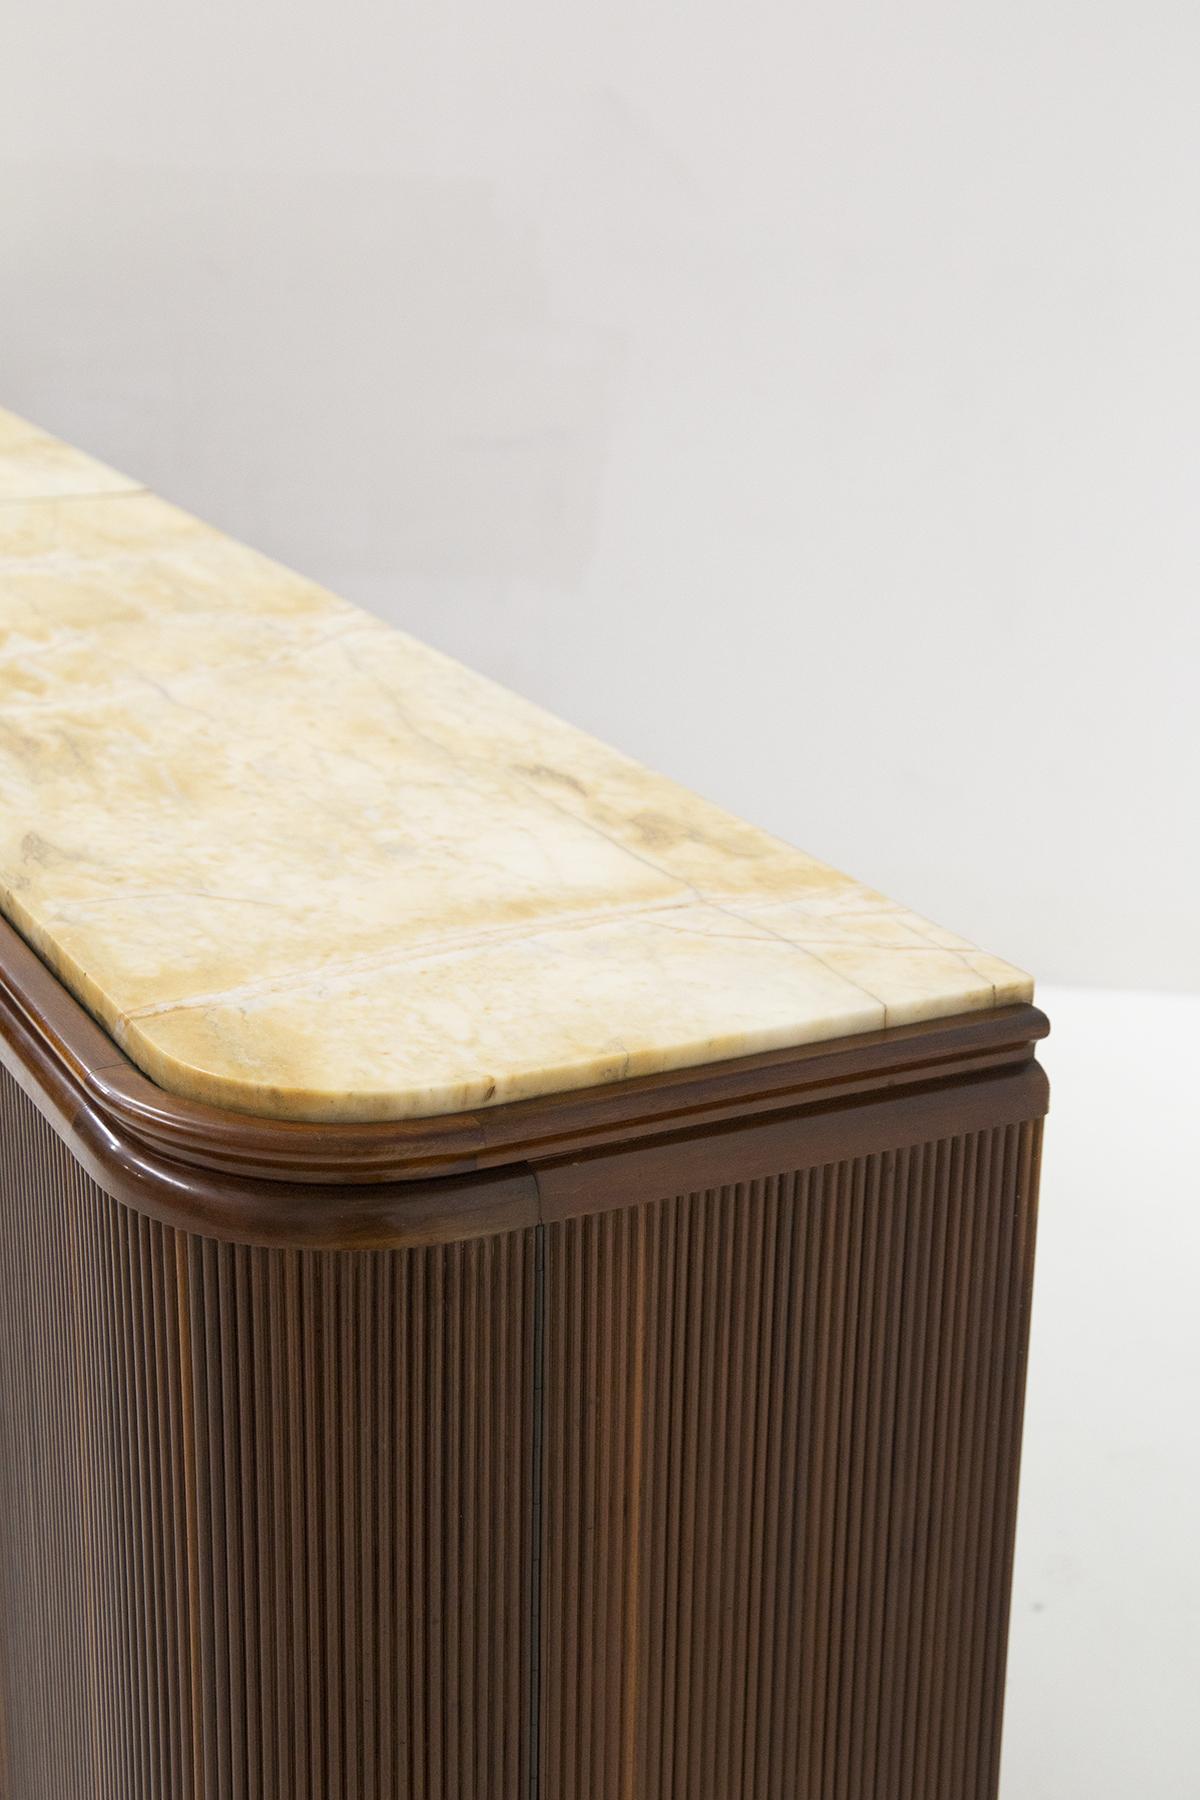 Gino Rancati Rare Wood and Marble Sideboard, Published For Sale 8